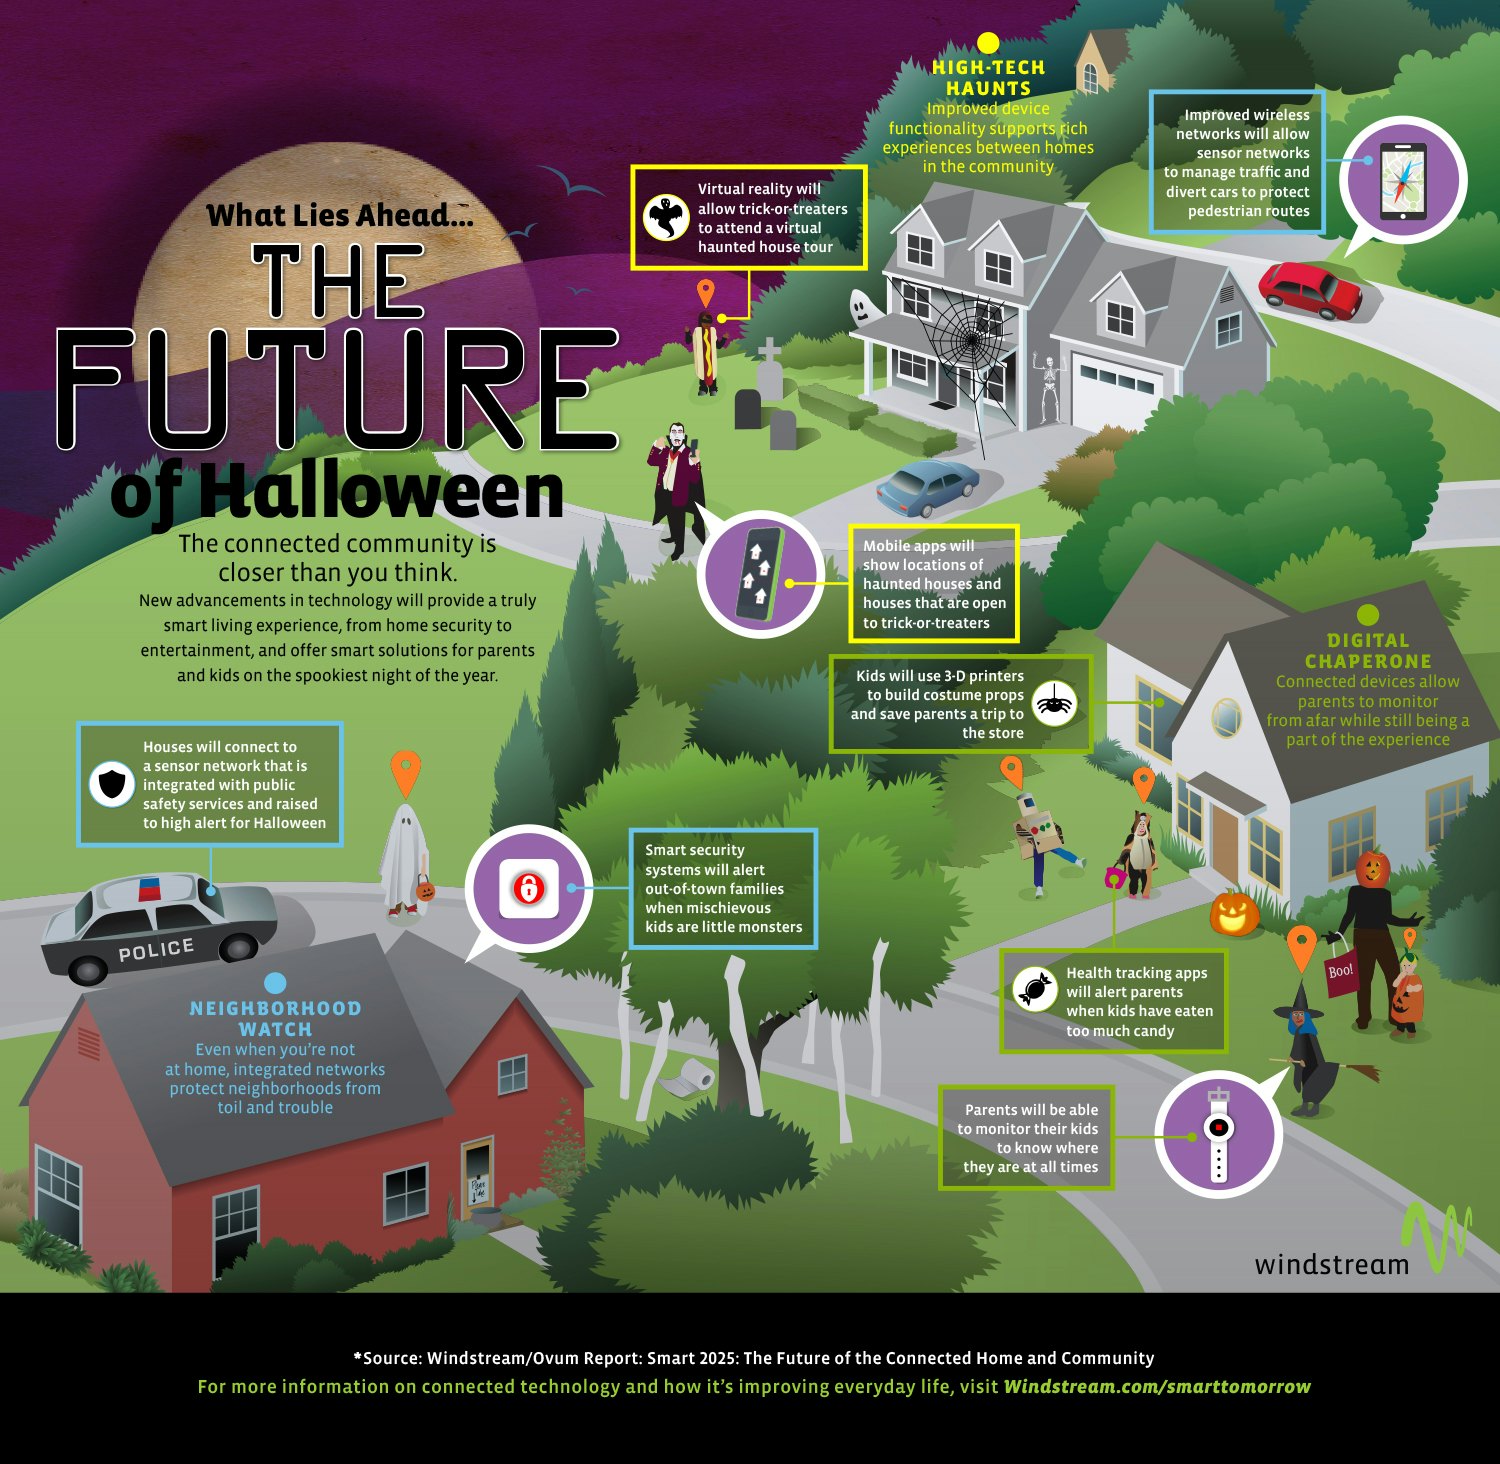 The Future Of Halloween Will Be Hella Different By 2025, According To These Predictions